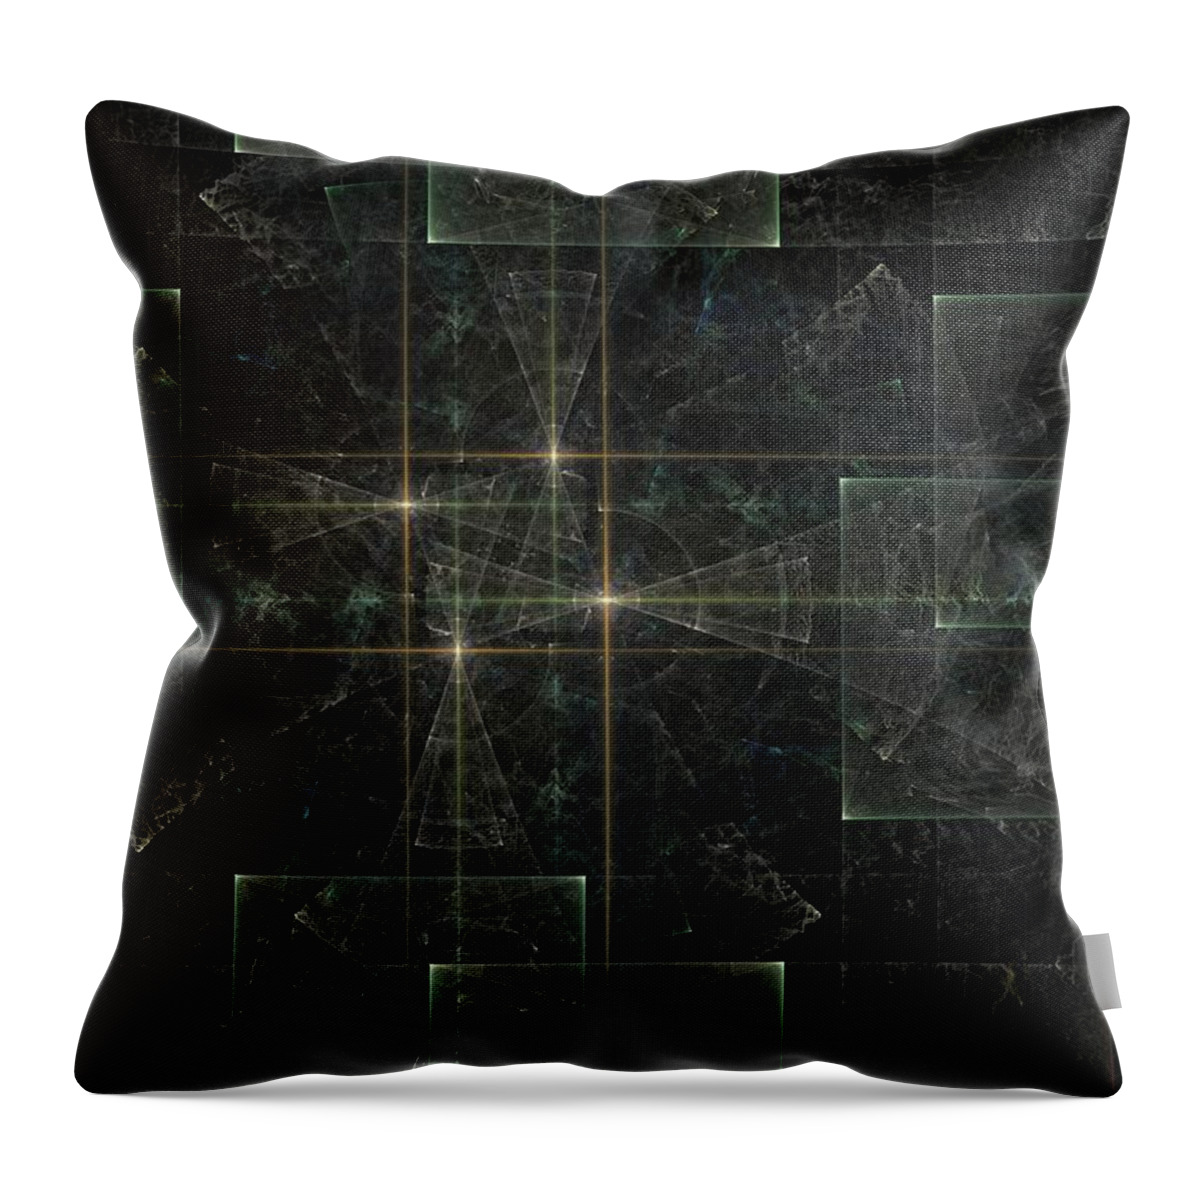 Home Throw Pillow featuring the digital art Fall So Freely Down by Jeff Iverson